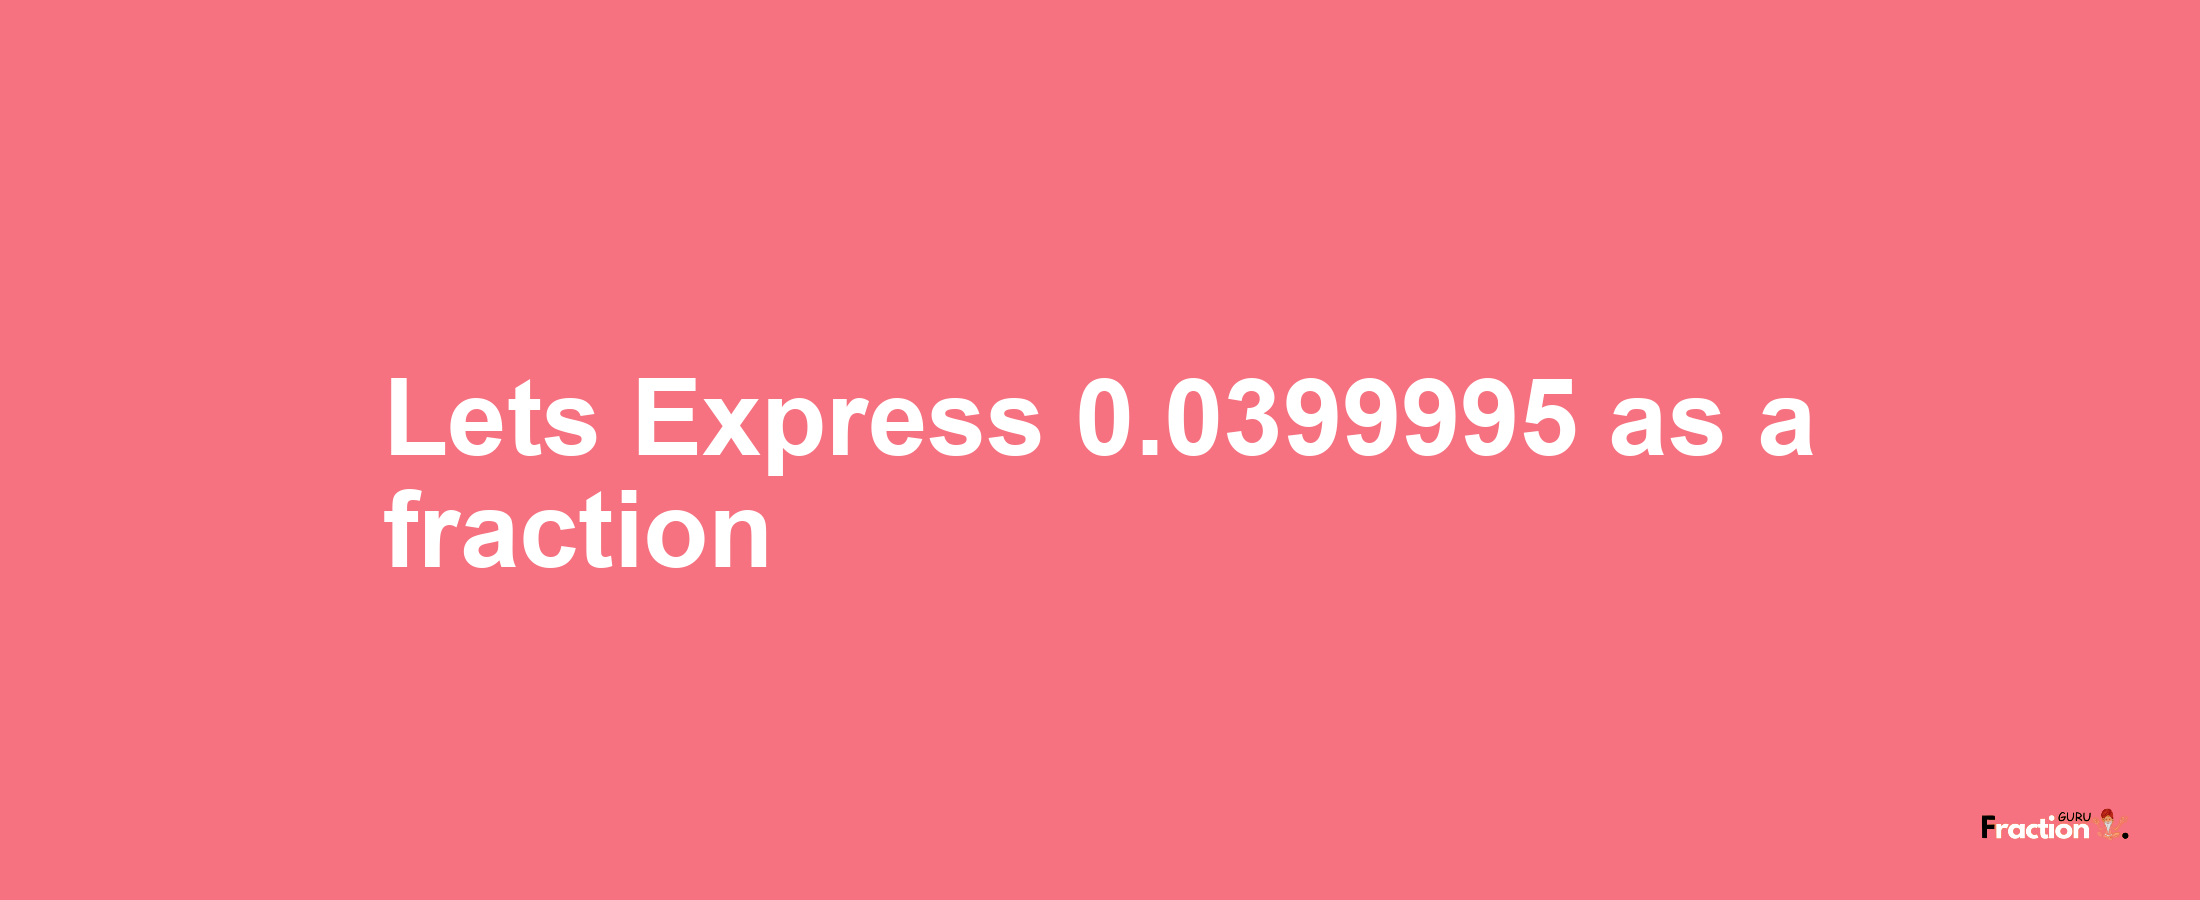 Lets Express 0.0399995 as afraction